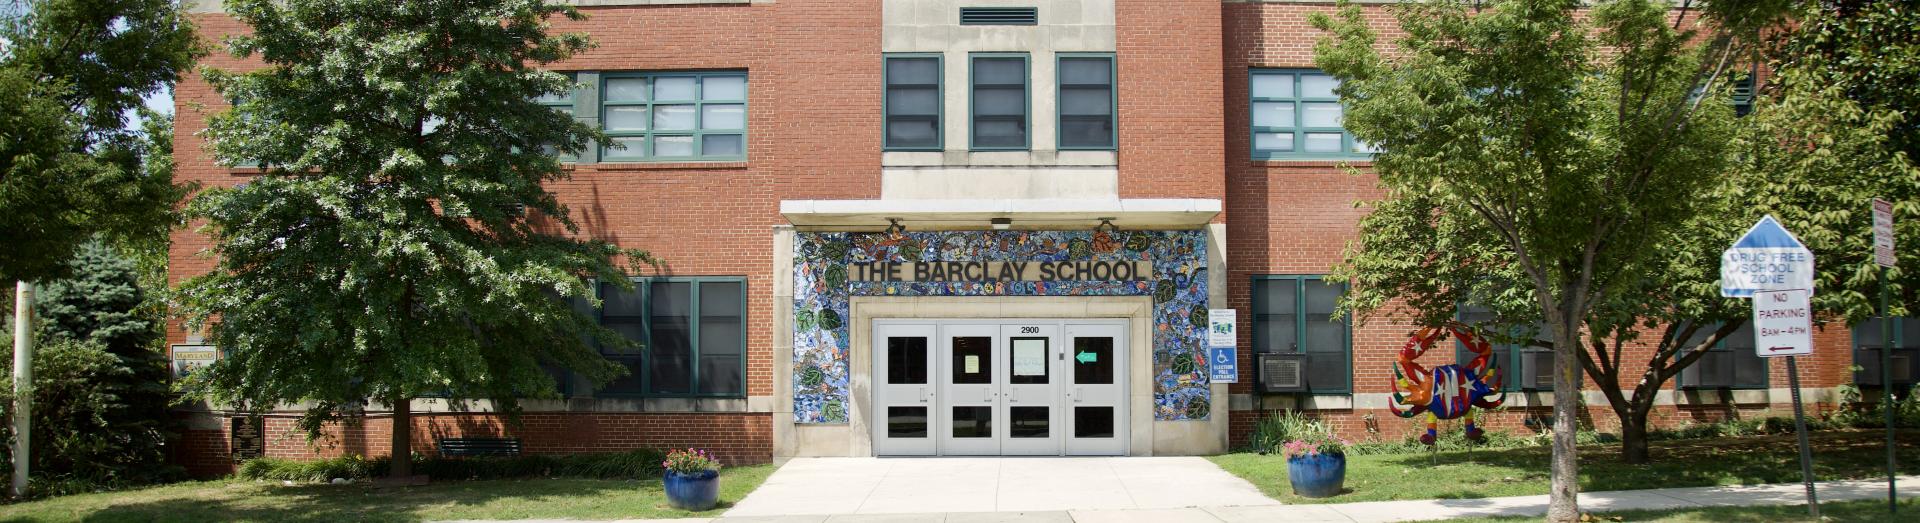 Barclay Elementary/Middle School